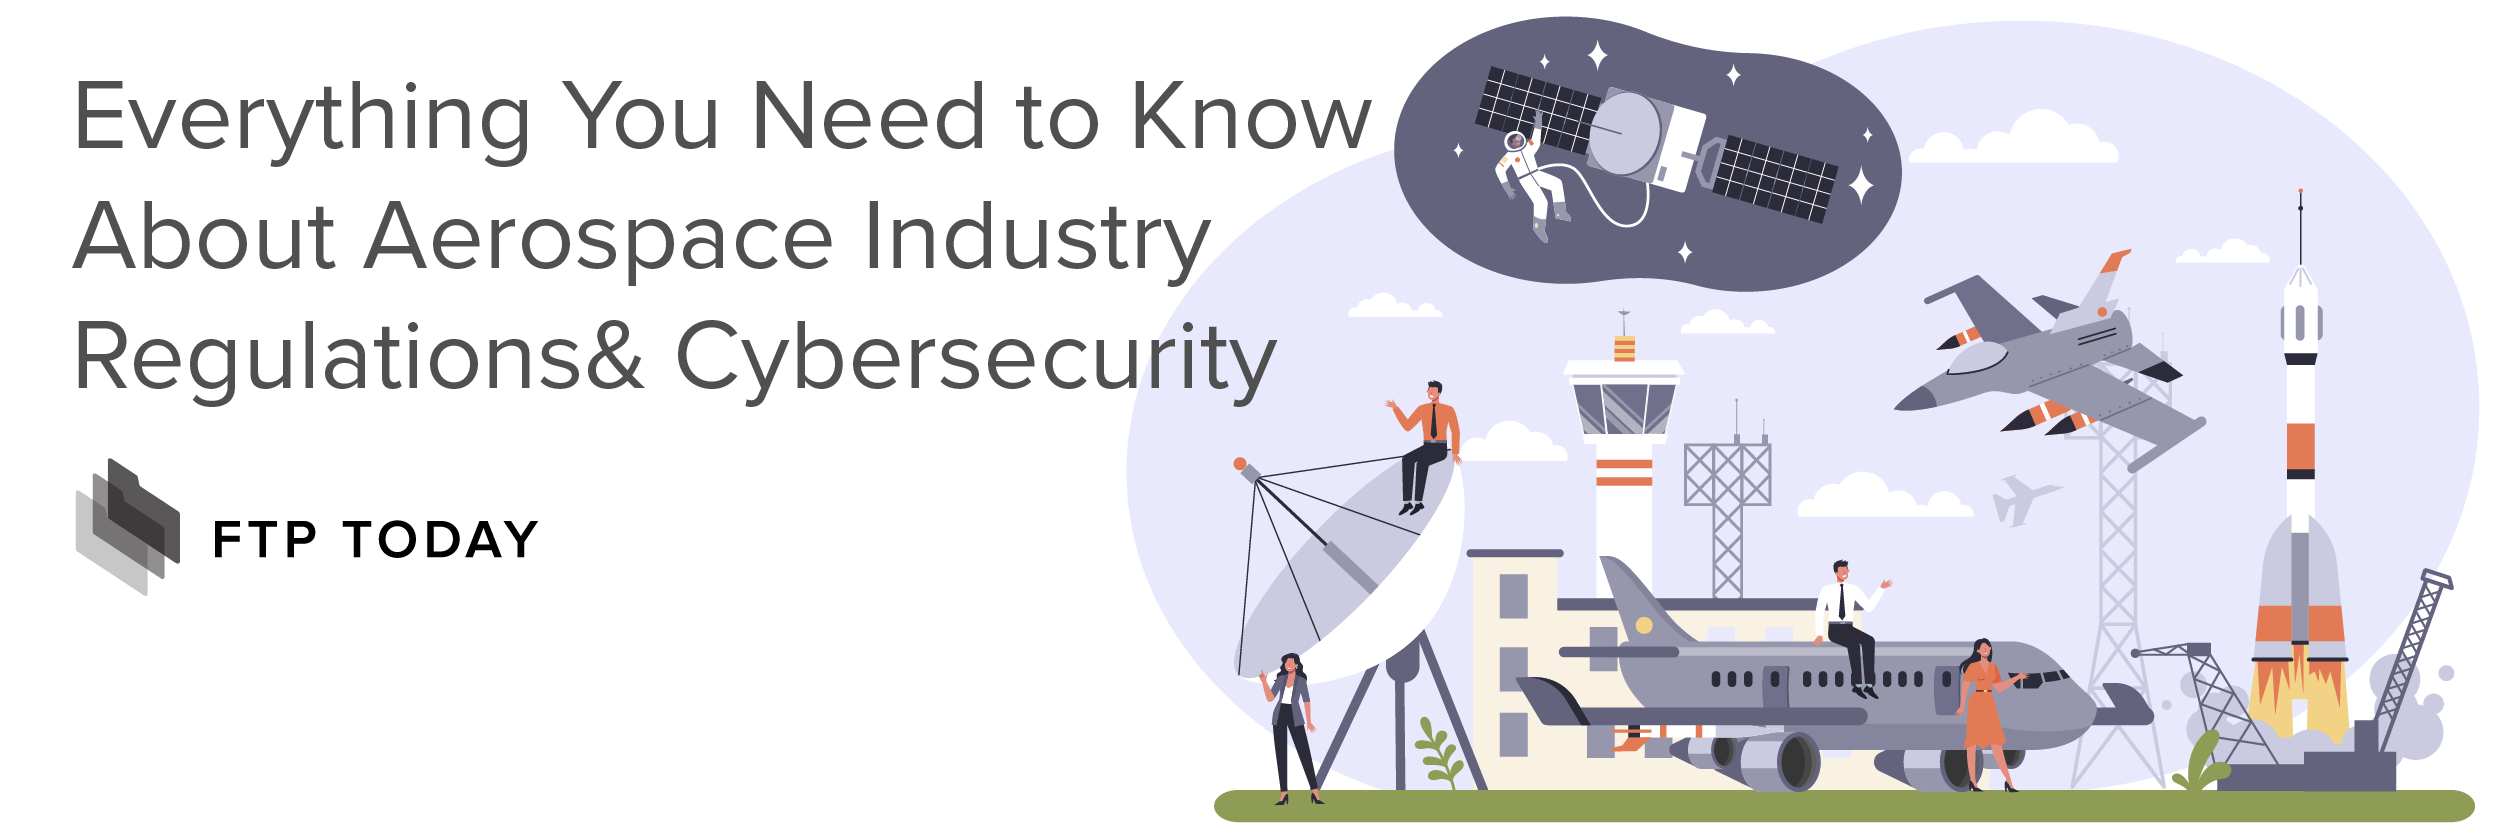 Everything You Need to Know About Aerospace Industry Regulations and Cybersecurity